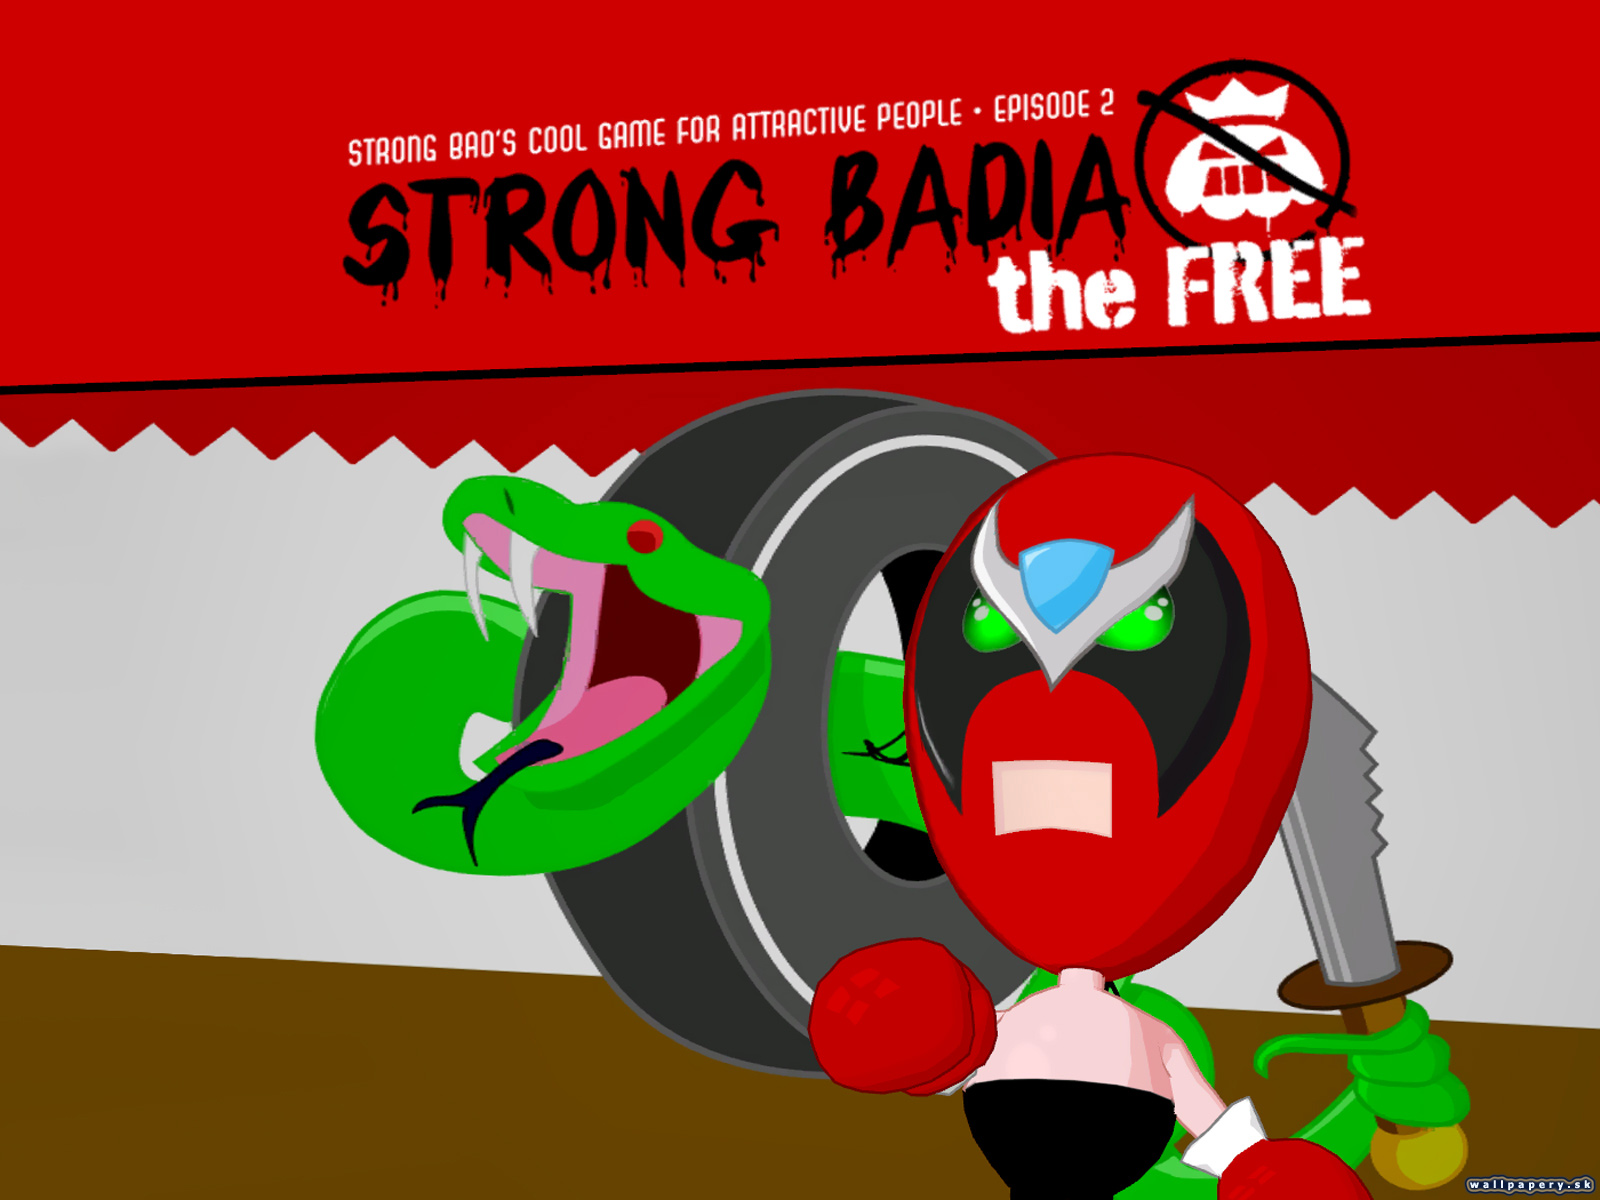 Strong Bad's Episode 2: Strong Badia the Free - wallpaper 1